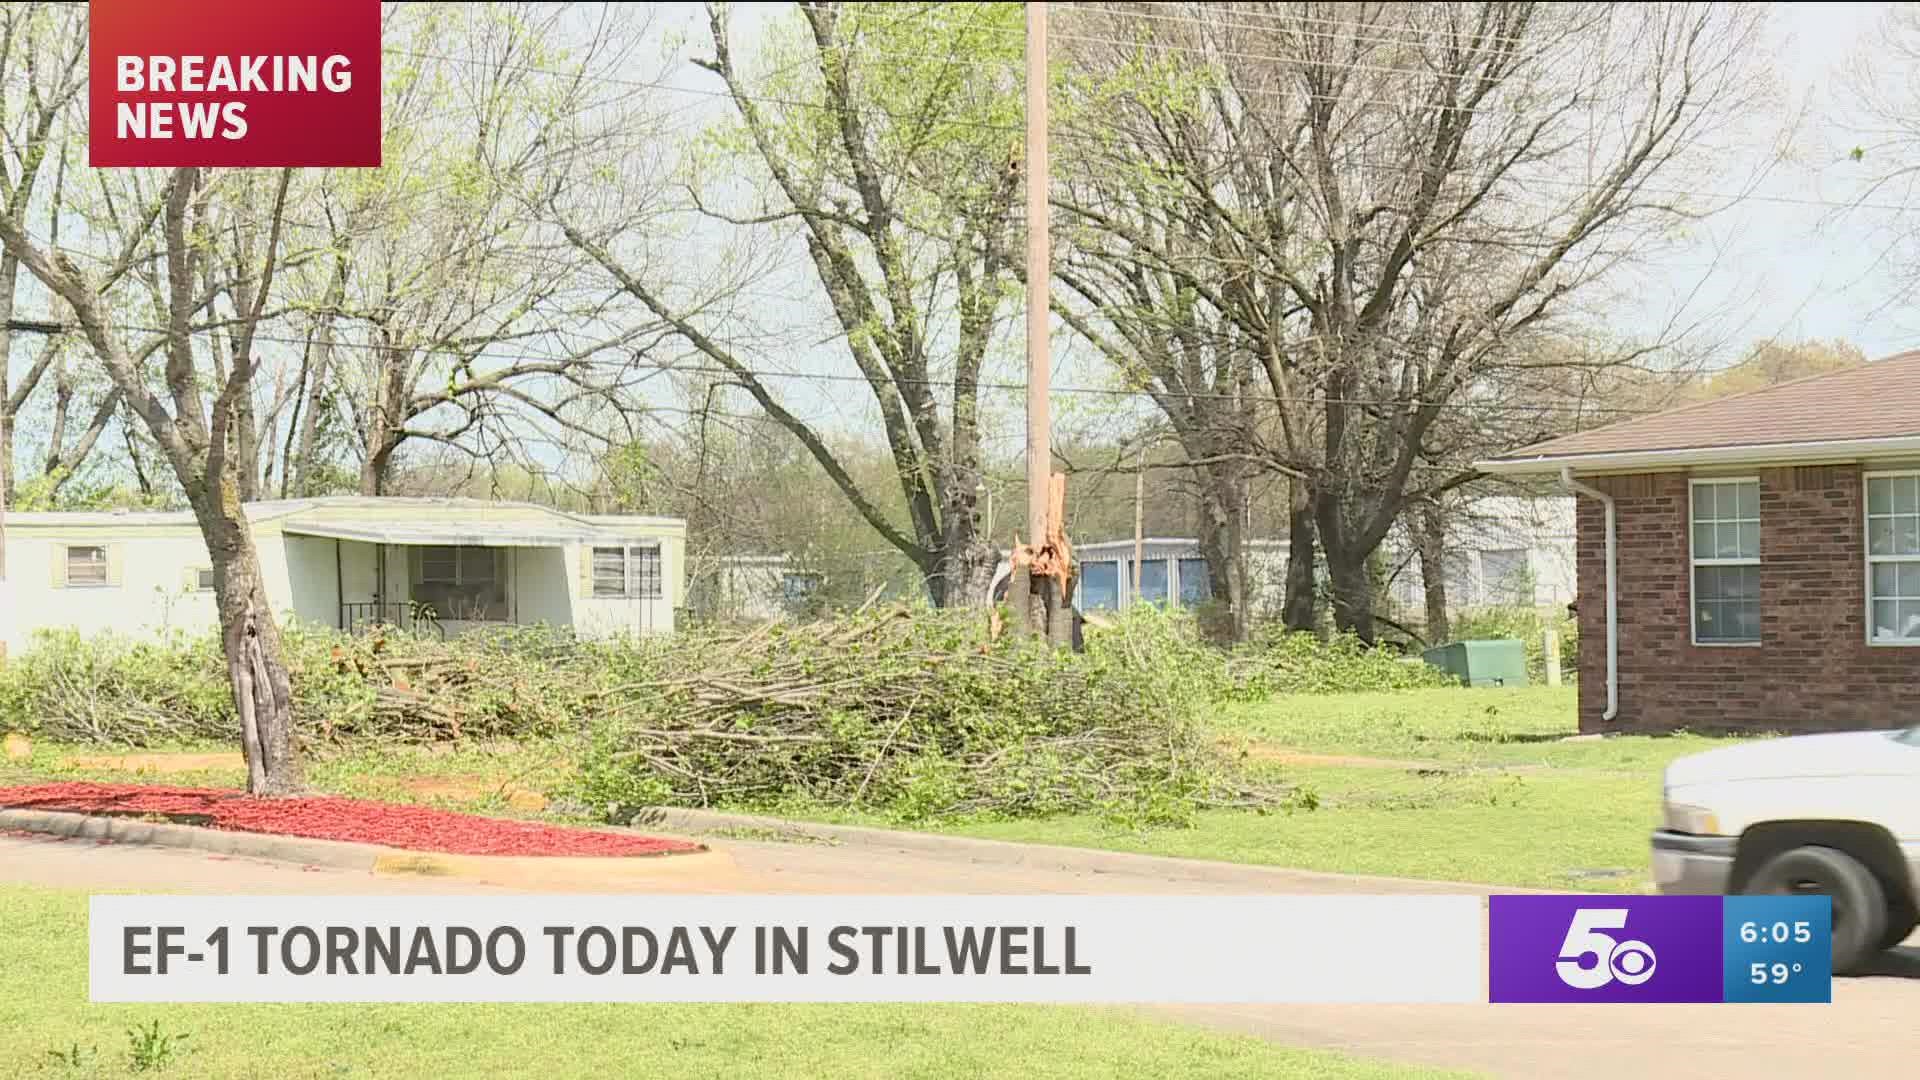 According to Stilwell Mayor Jean Wright, city crews started checking on residents to see if anyone was hurt as soon as the storm struck.